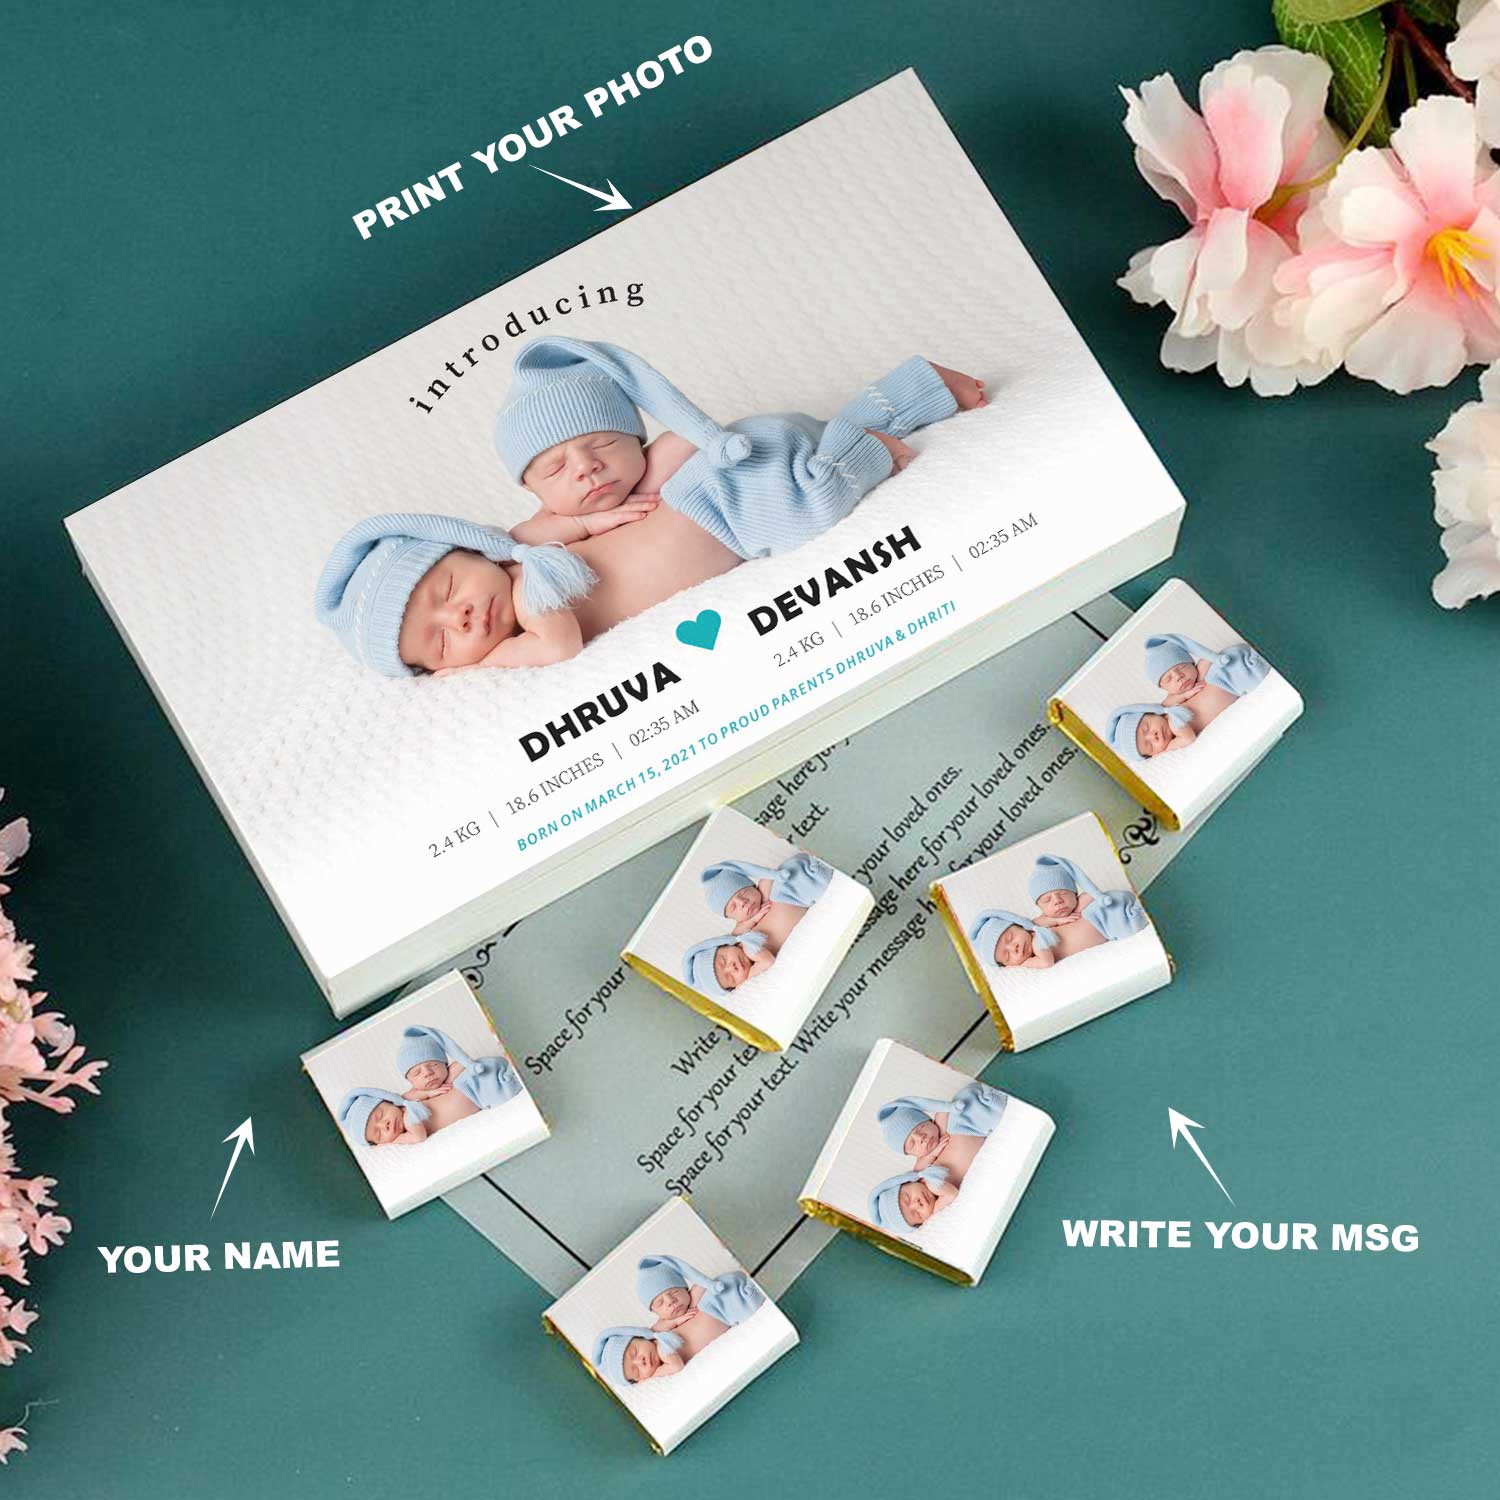  Twin baby birth announcement ideas.  Twins baby announcement.   Twins birth announcement chocolate box india.  Twins birth announcement chocolate box.